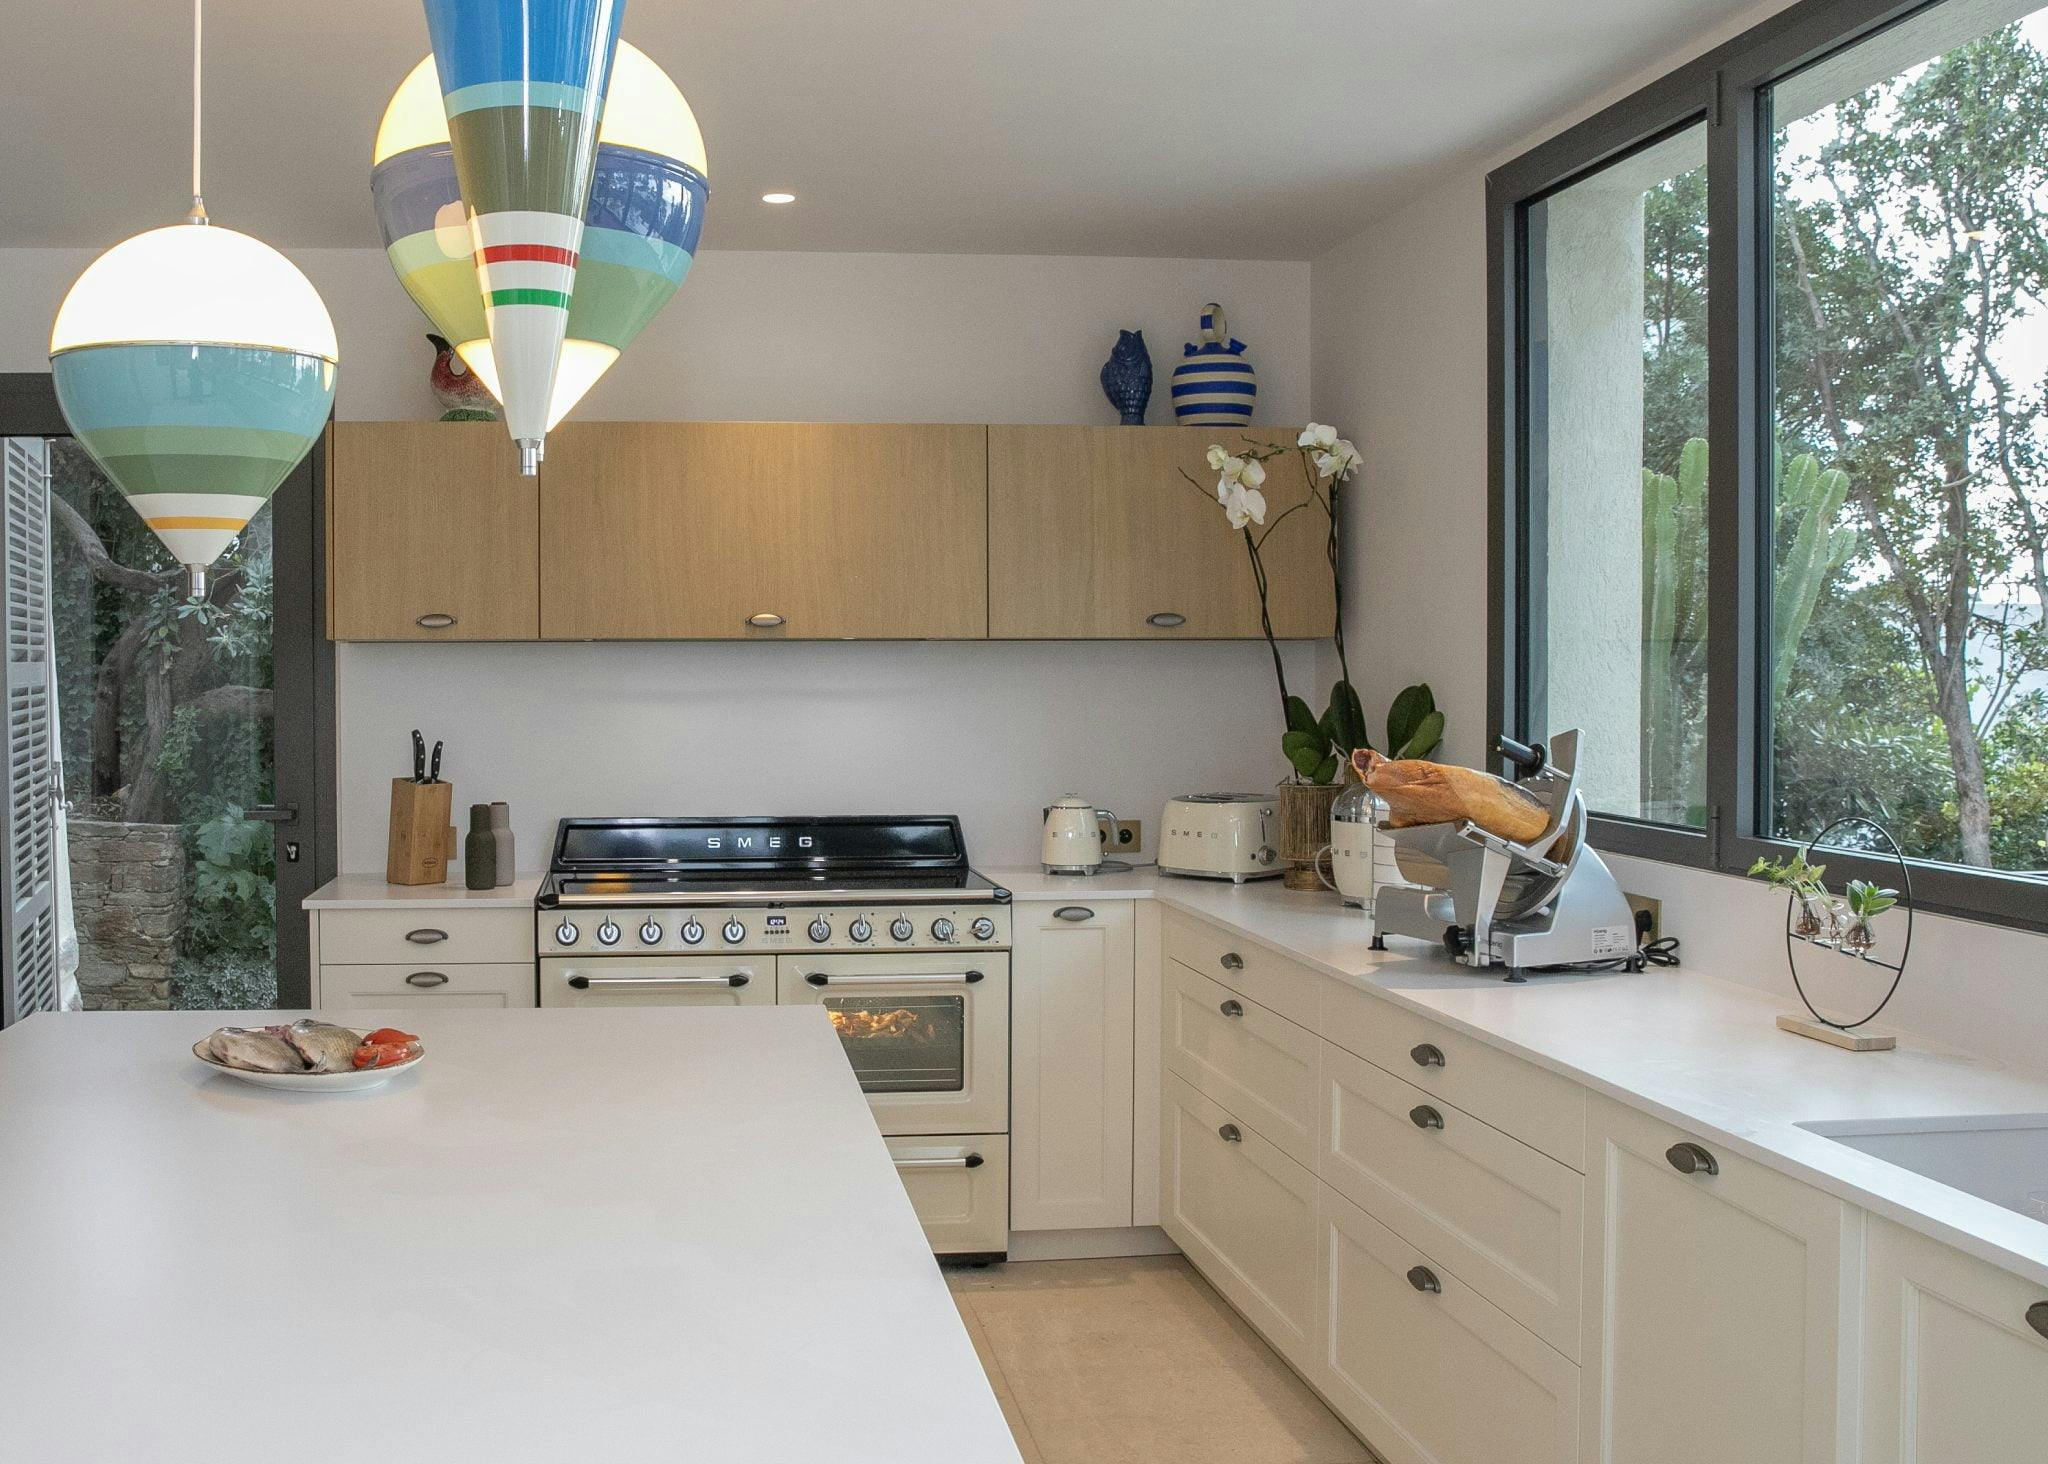 Kitchen with large worktop, top-of-the-range appliances in cream tones and pendant lights